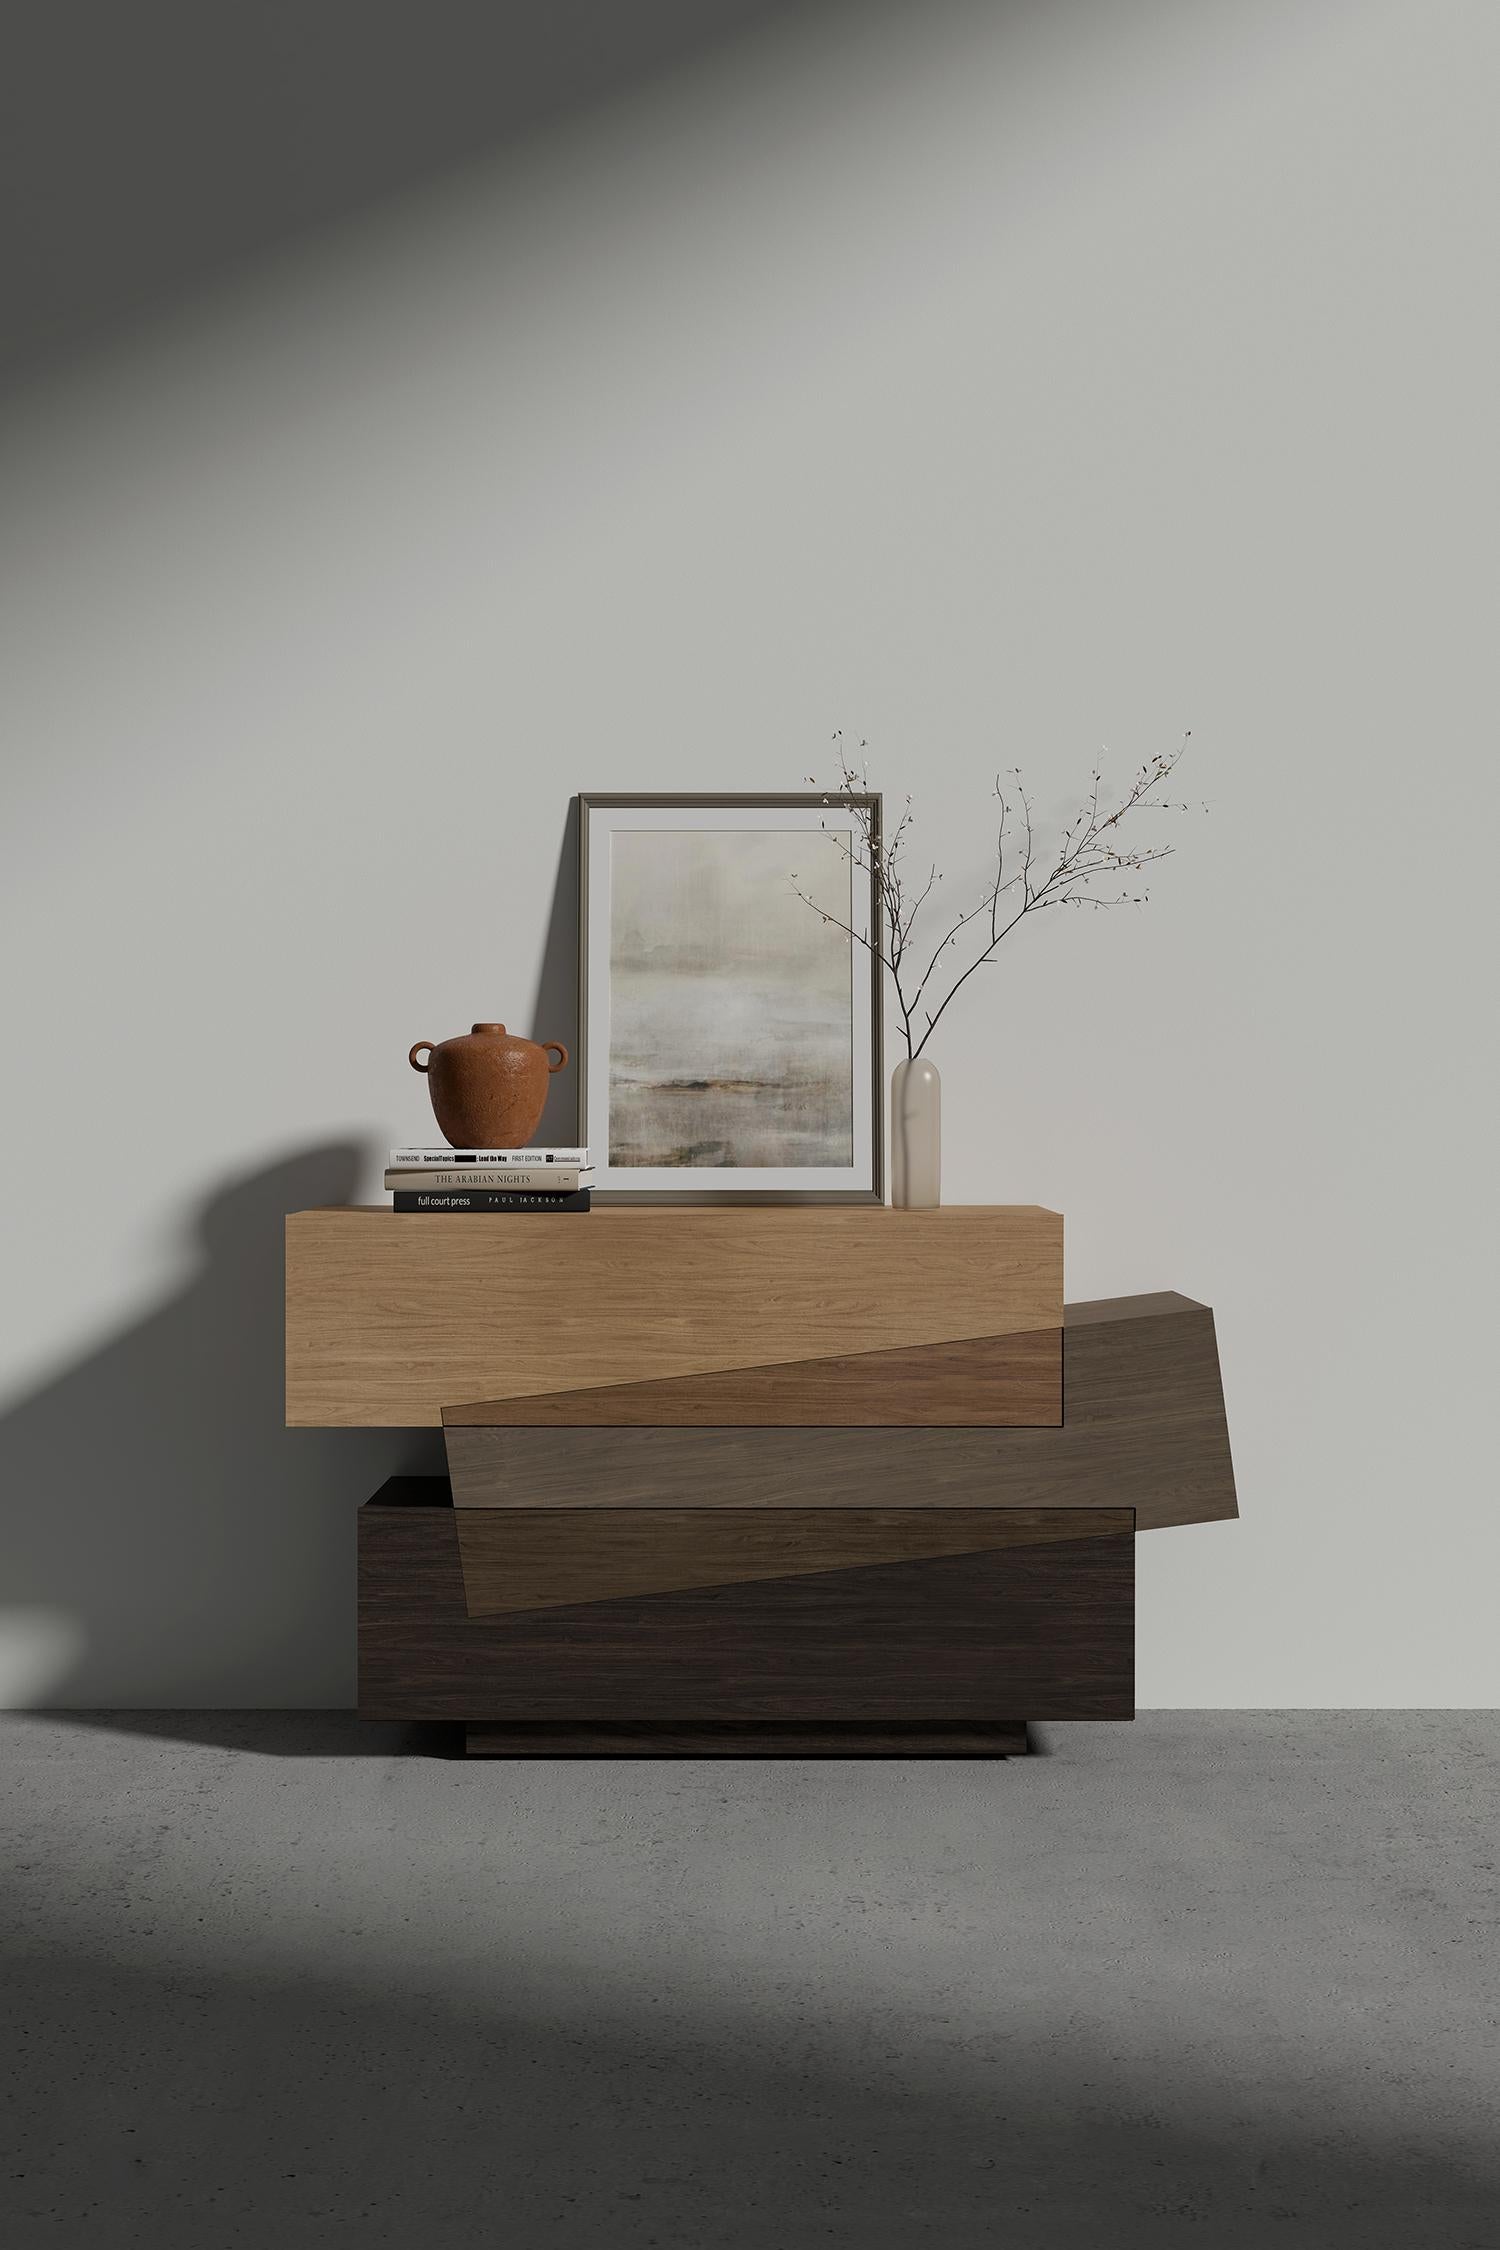 Booleanos Commode 3 Drawers, Chest of Drawers in Warm Wood Veneer, Joel Escalona

Booleanos collection reflects the concept of involuntary interactions and unexpected intersections. 

Geometric cabinet designed by Joel Escalona, configured with